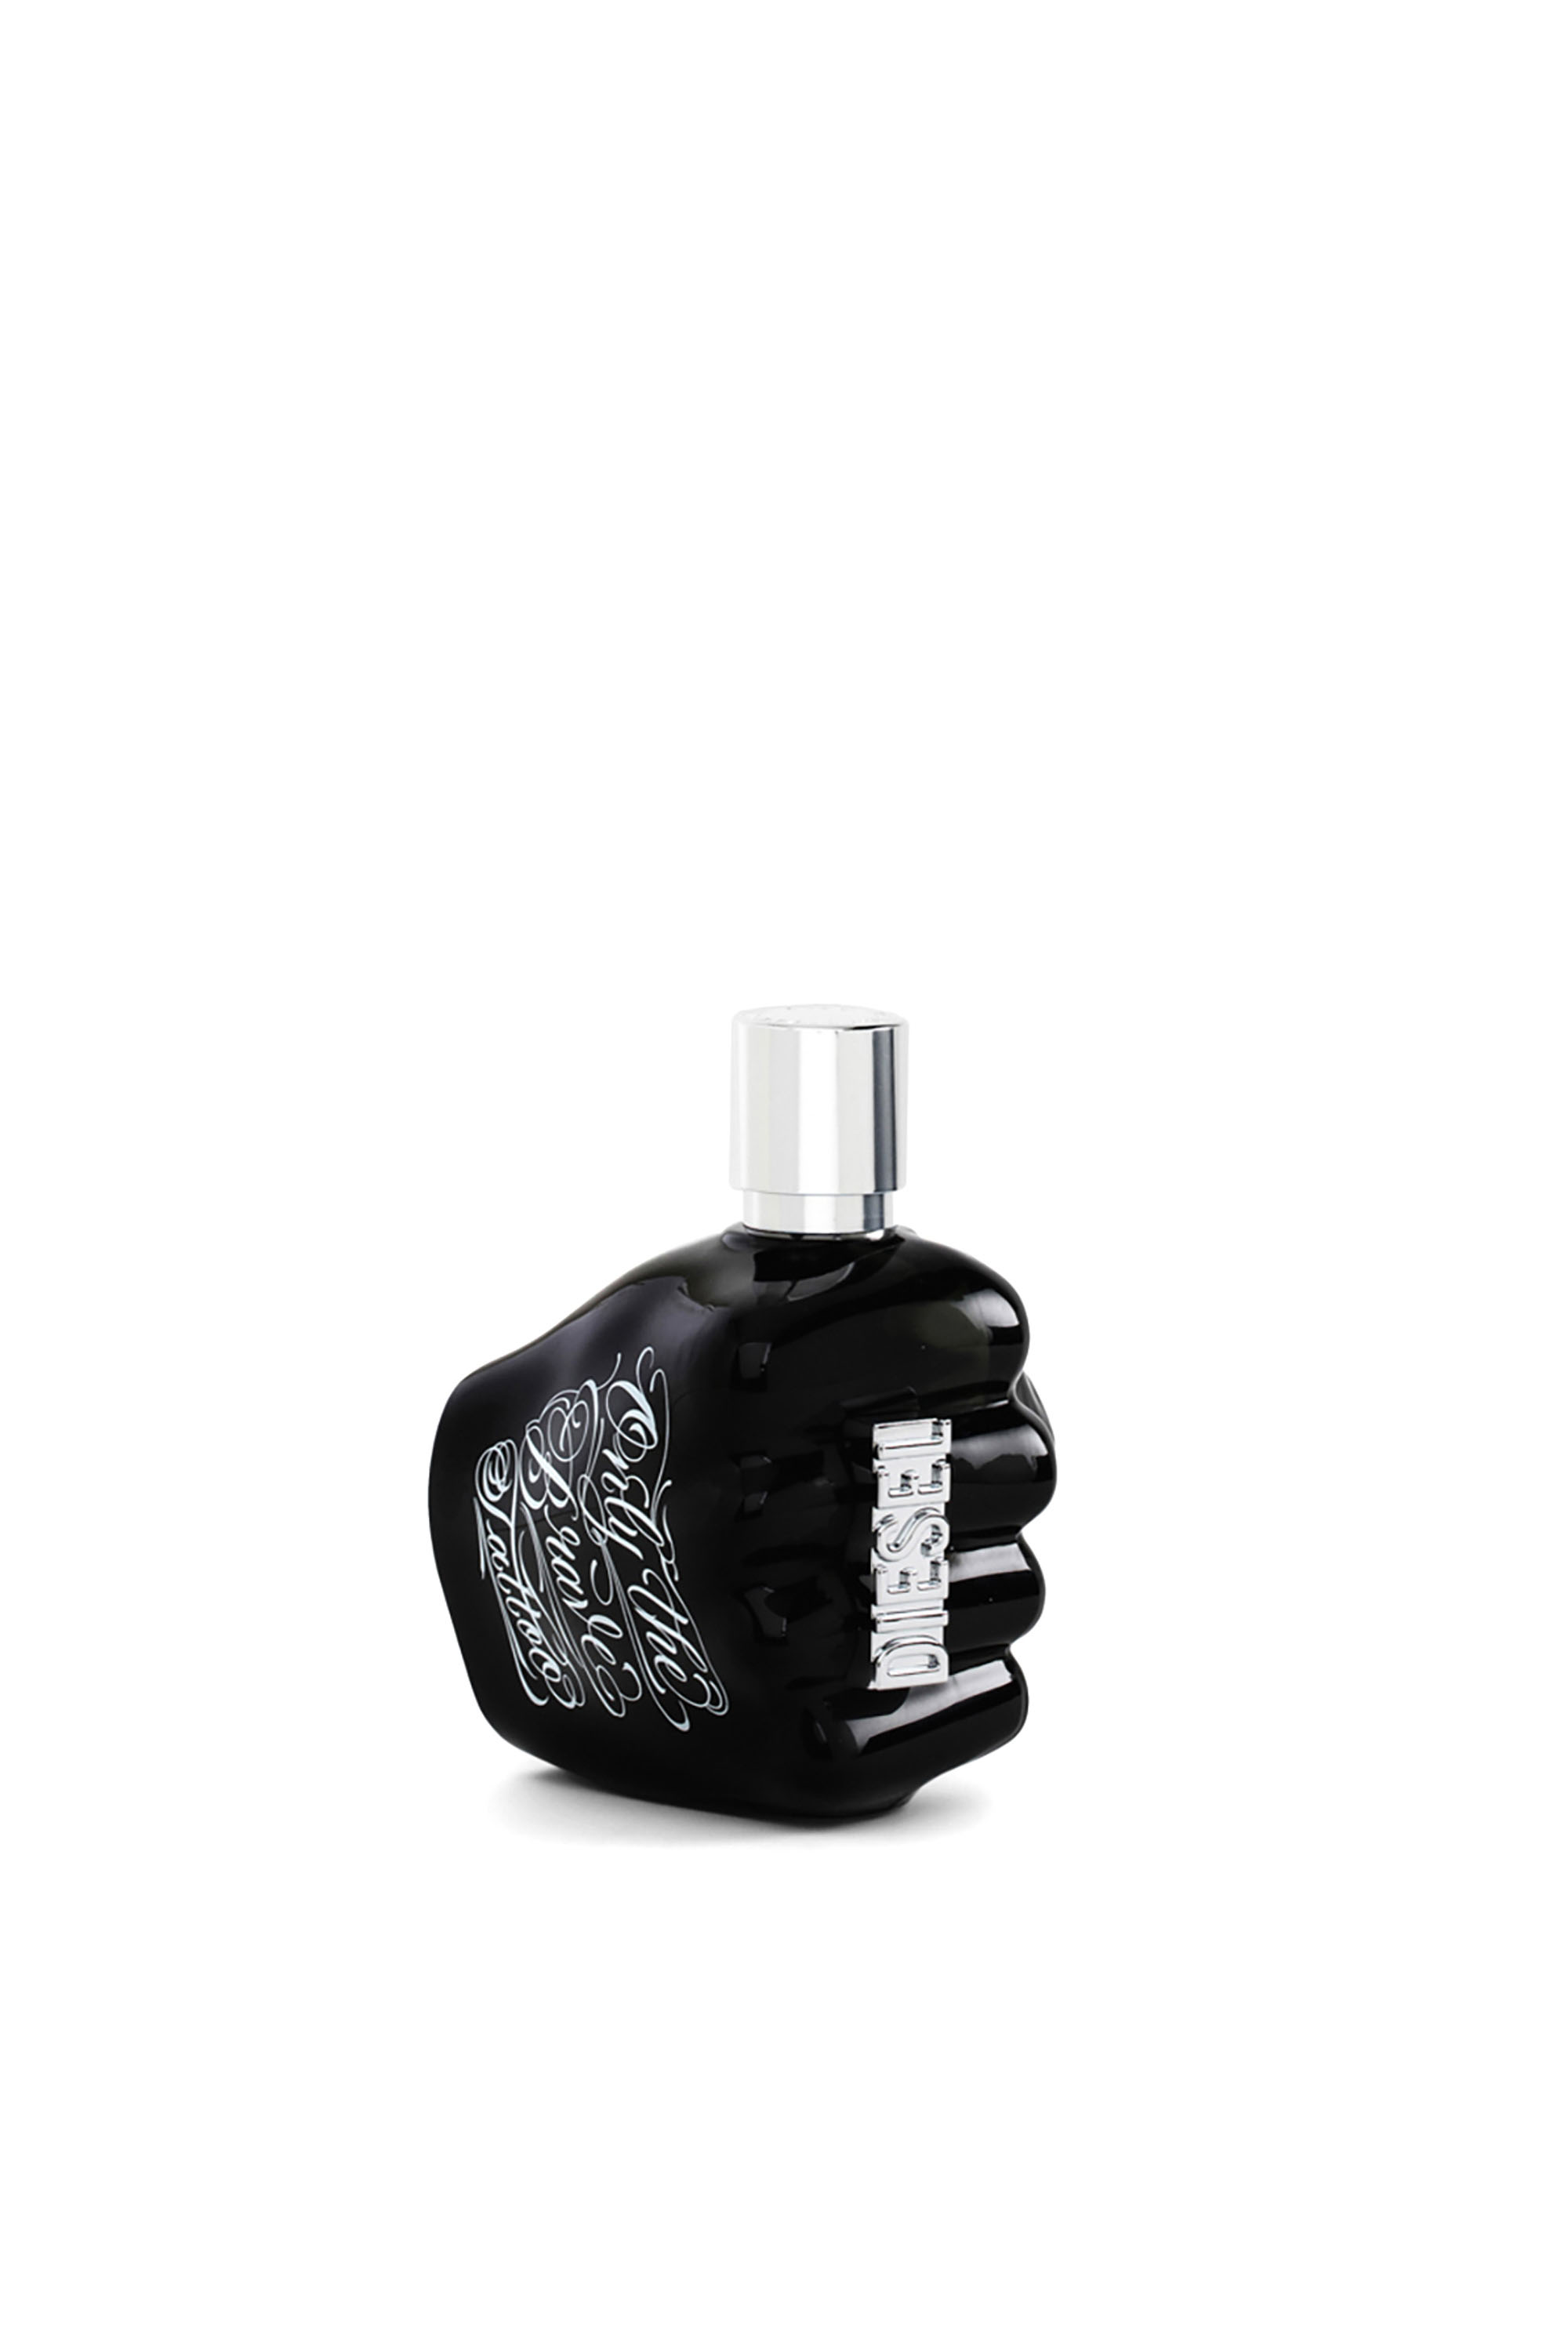 ONLY THE BRAVE TATTOO 75ML,  - Only The Brave